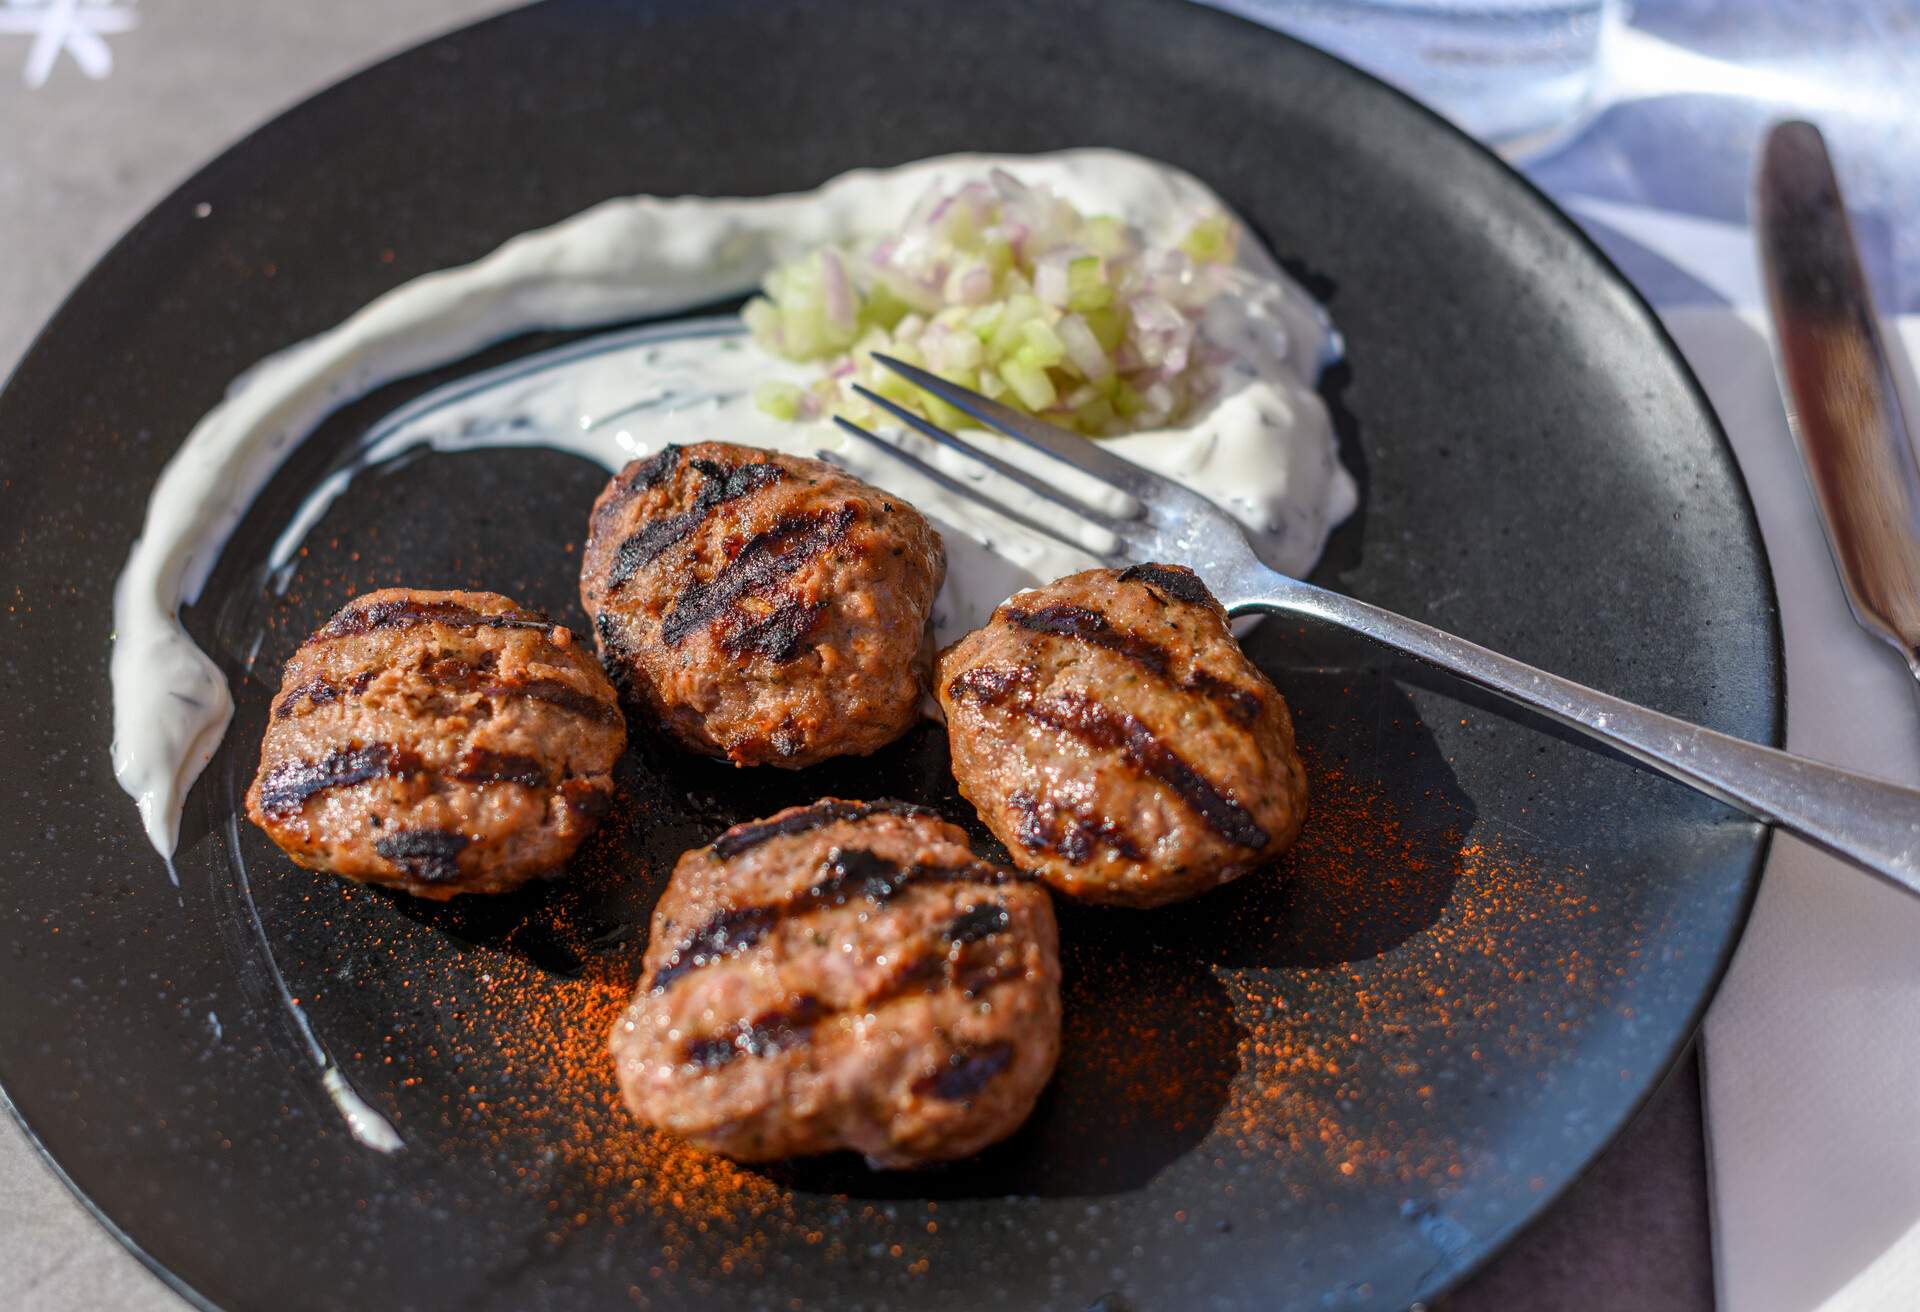 Delicious Greek meatballs served on the black plate.